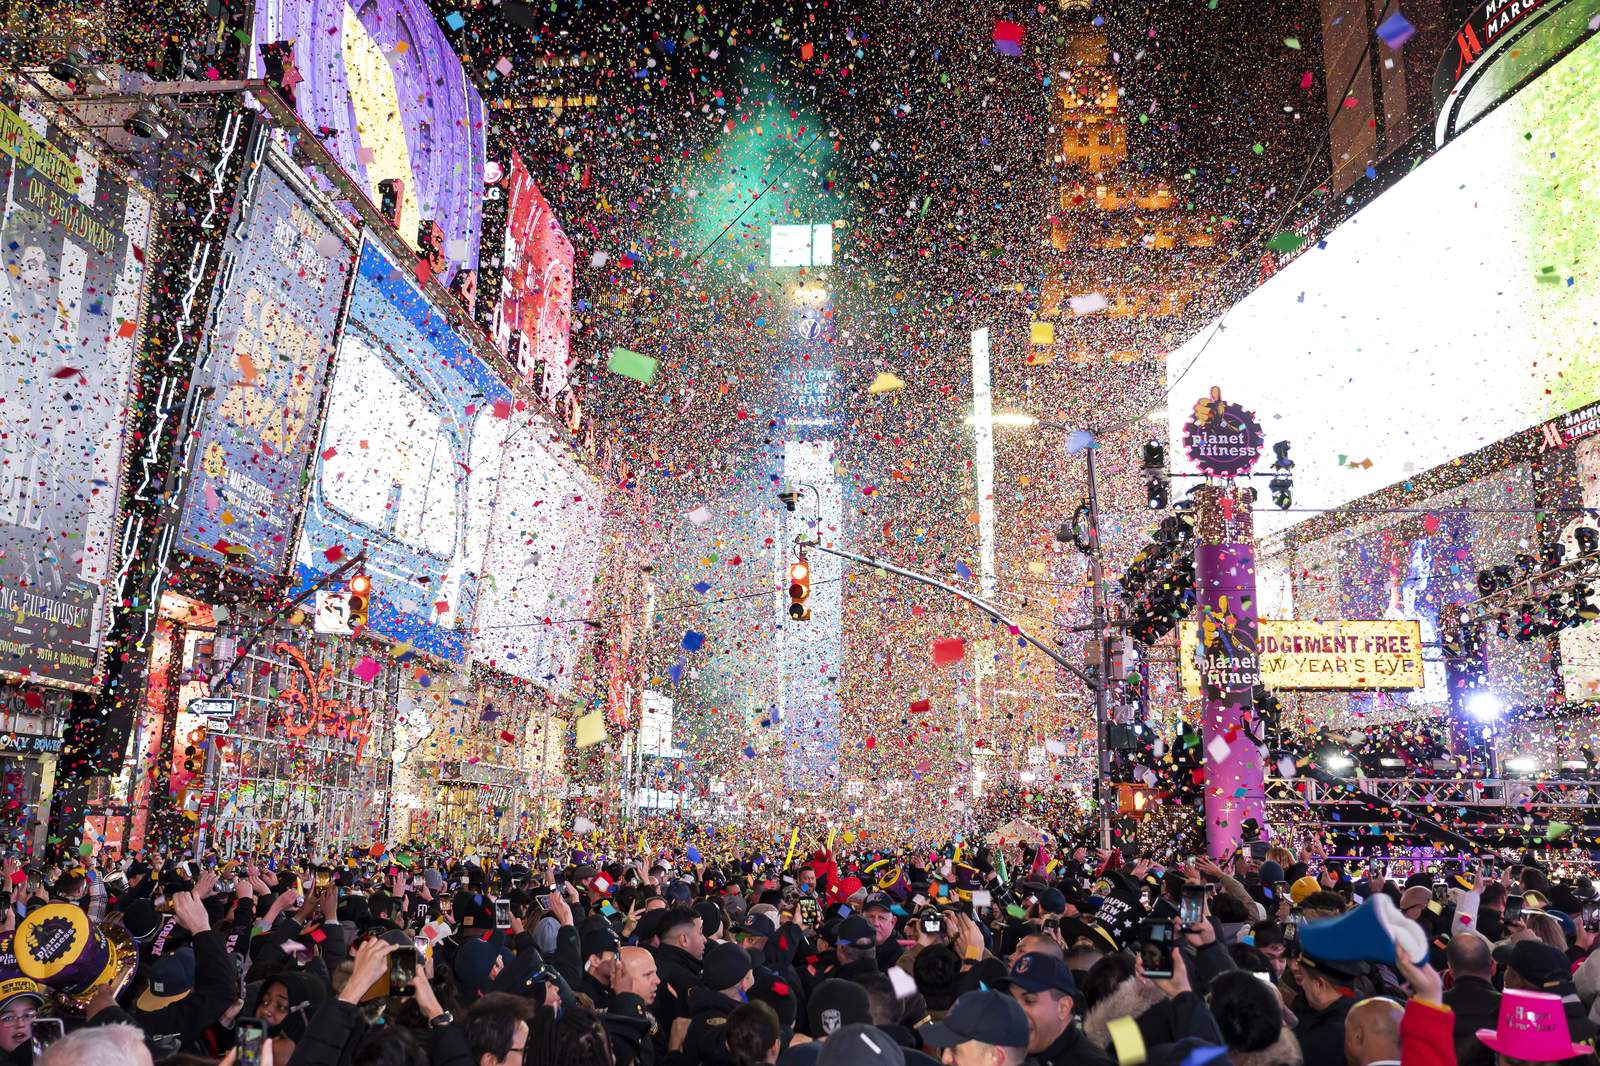 After a year like this, expect a strange New Year’s Eve